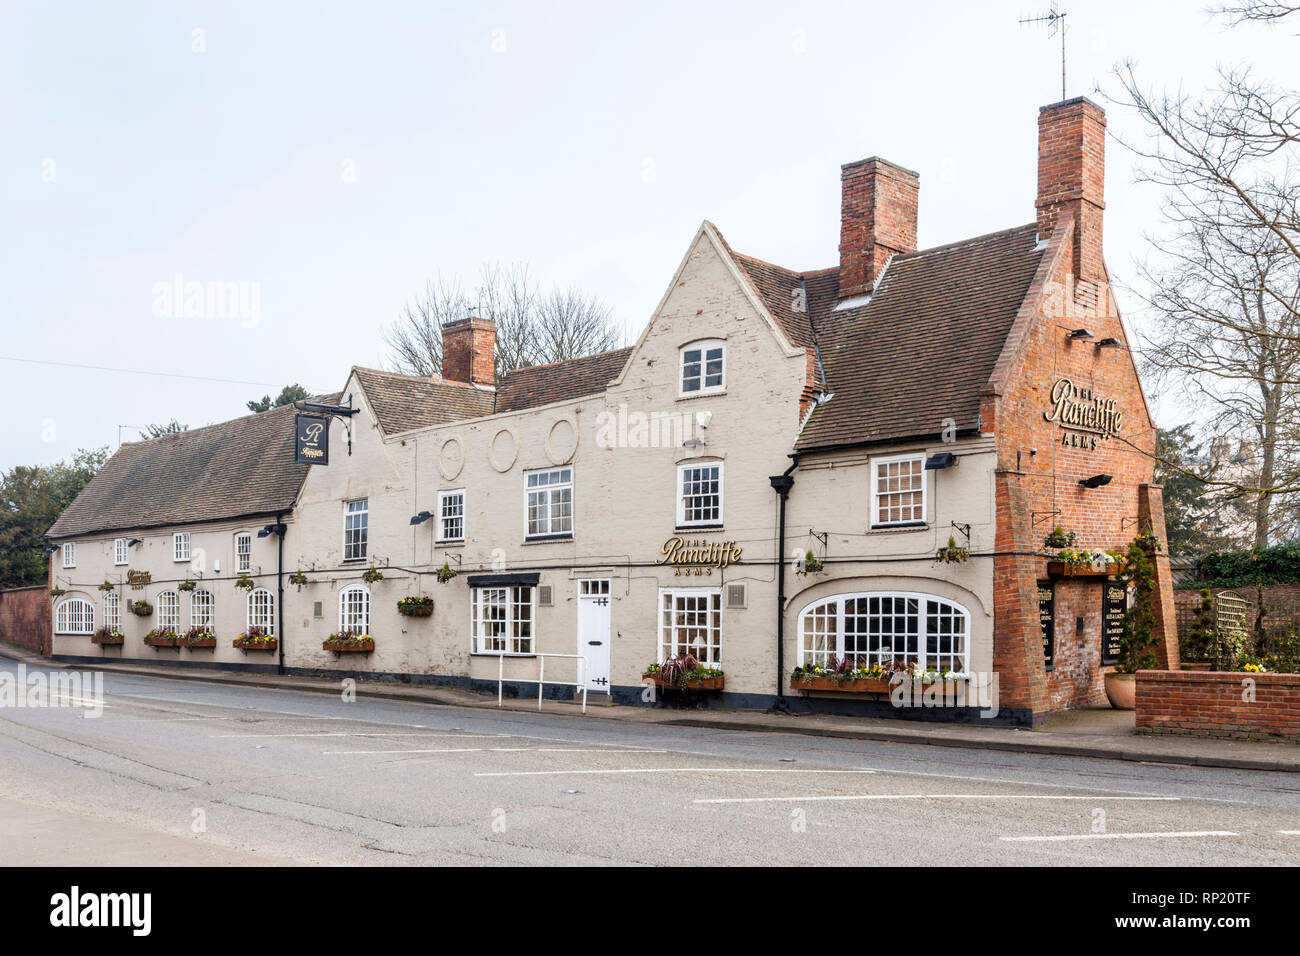 The Rancliffe Arms, Bunny, Nottinghamshire, England, UK. An early 17th century coaching inn. Stock Photo